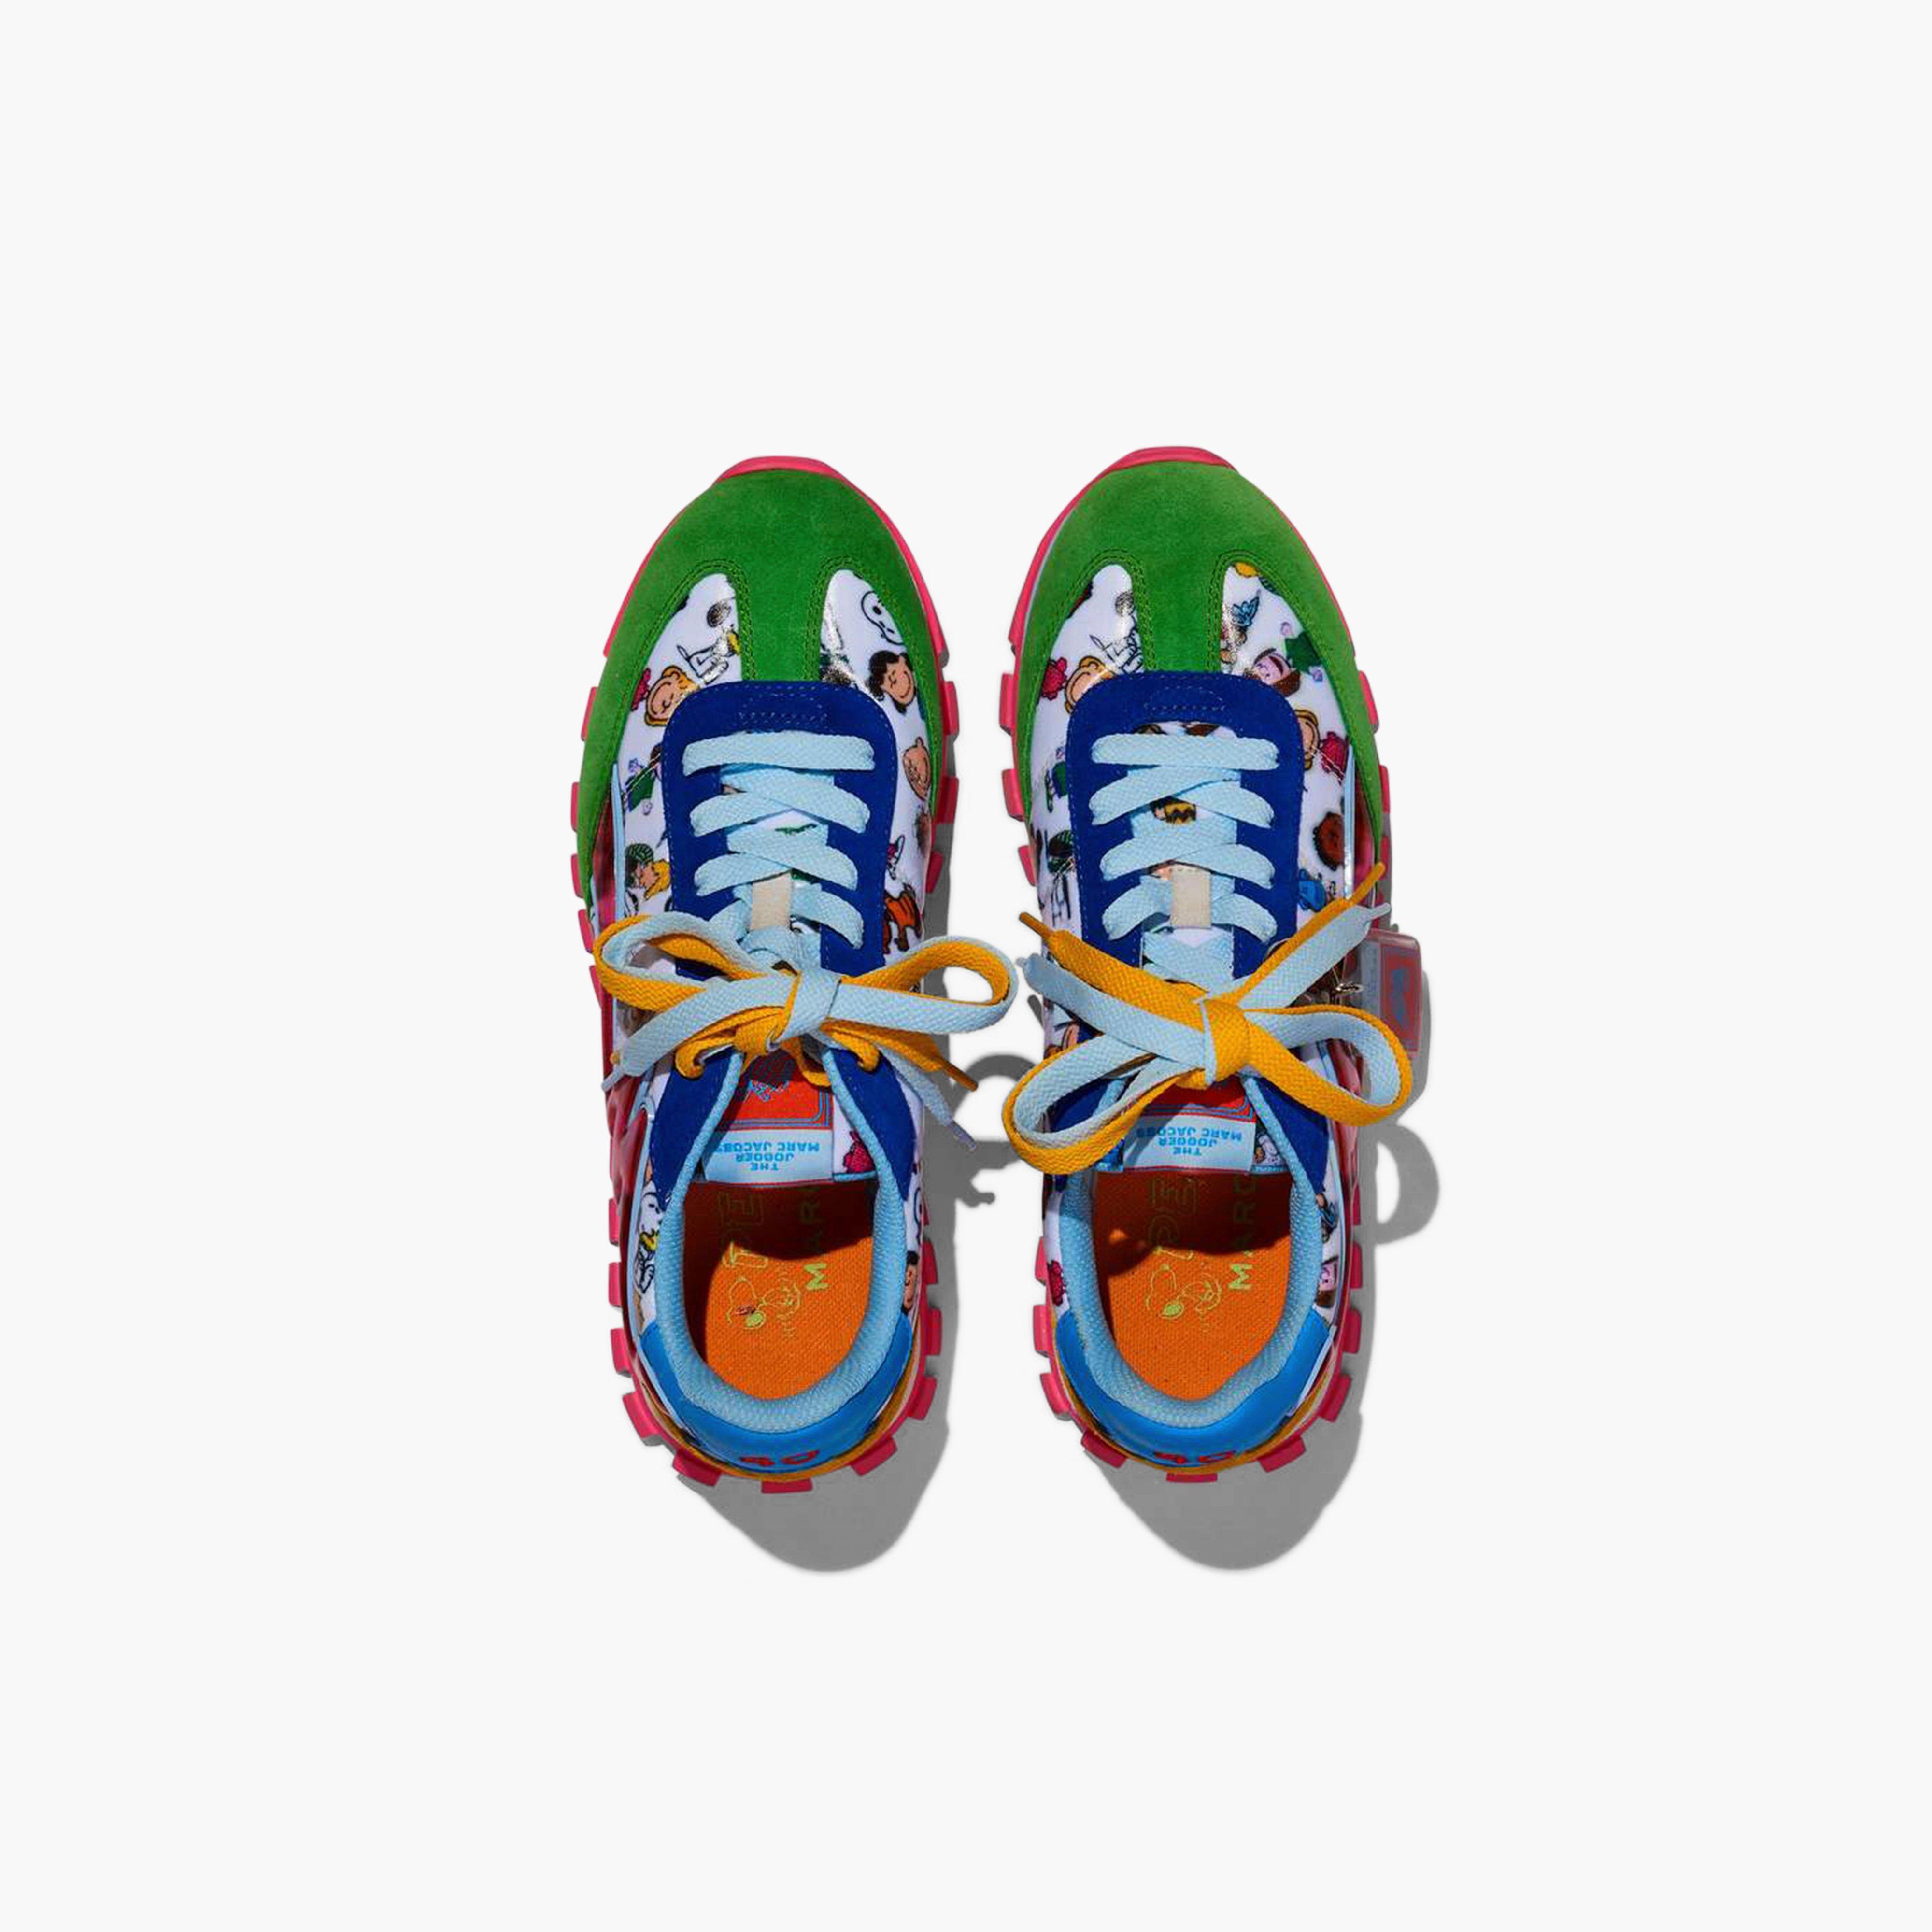 The Marc Jacobs 'The Tennis Shoes' Sneakers Size UK 4 = IT/EU 37 | eBay